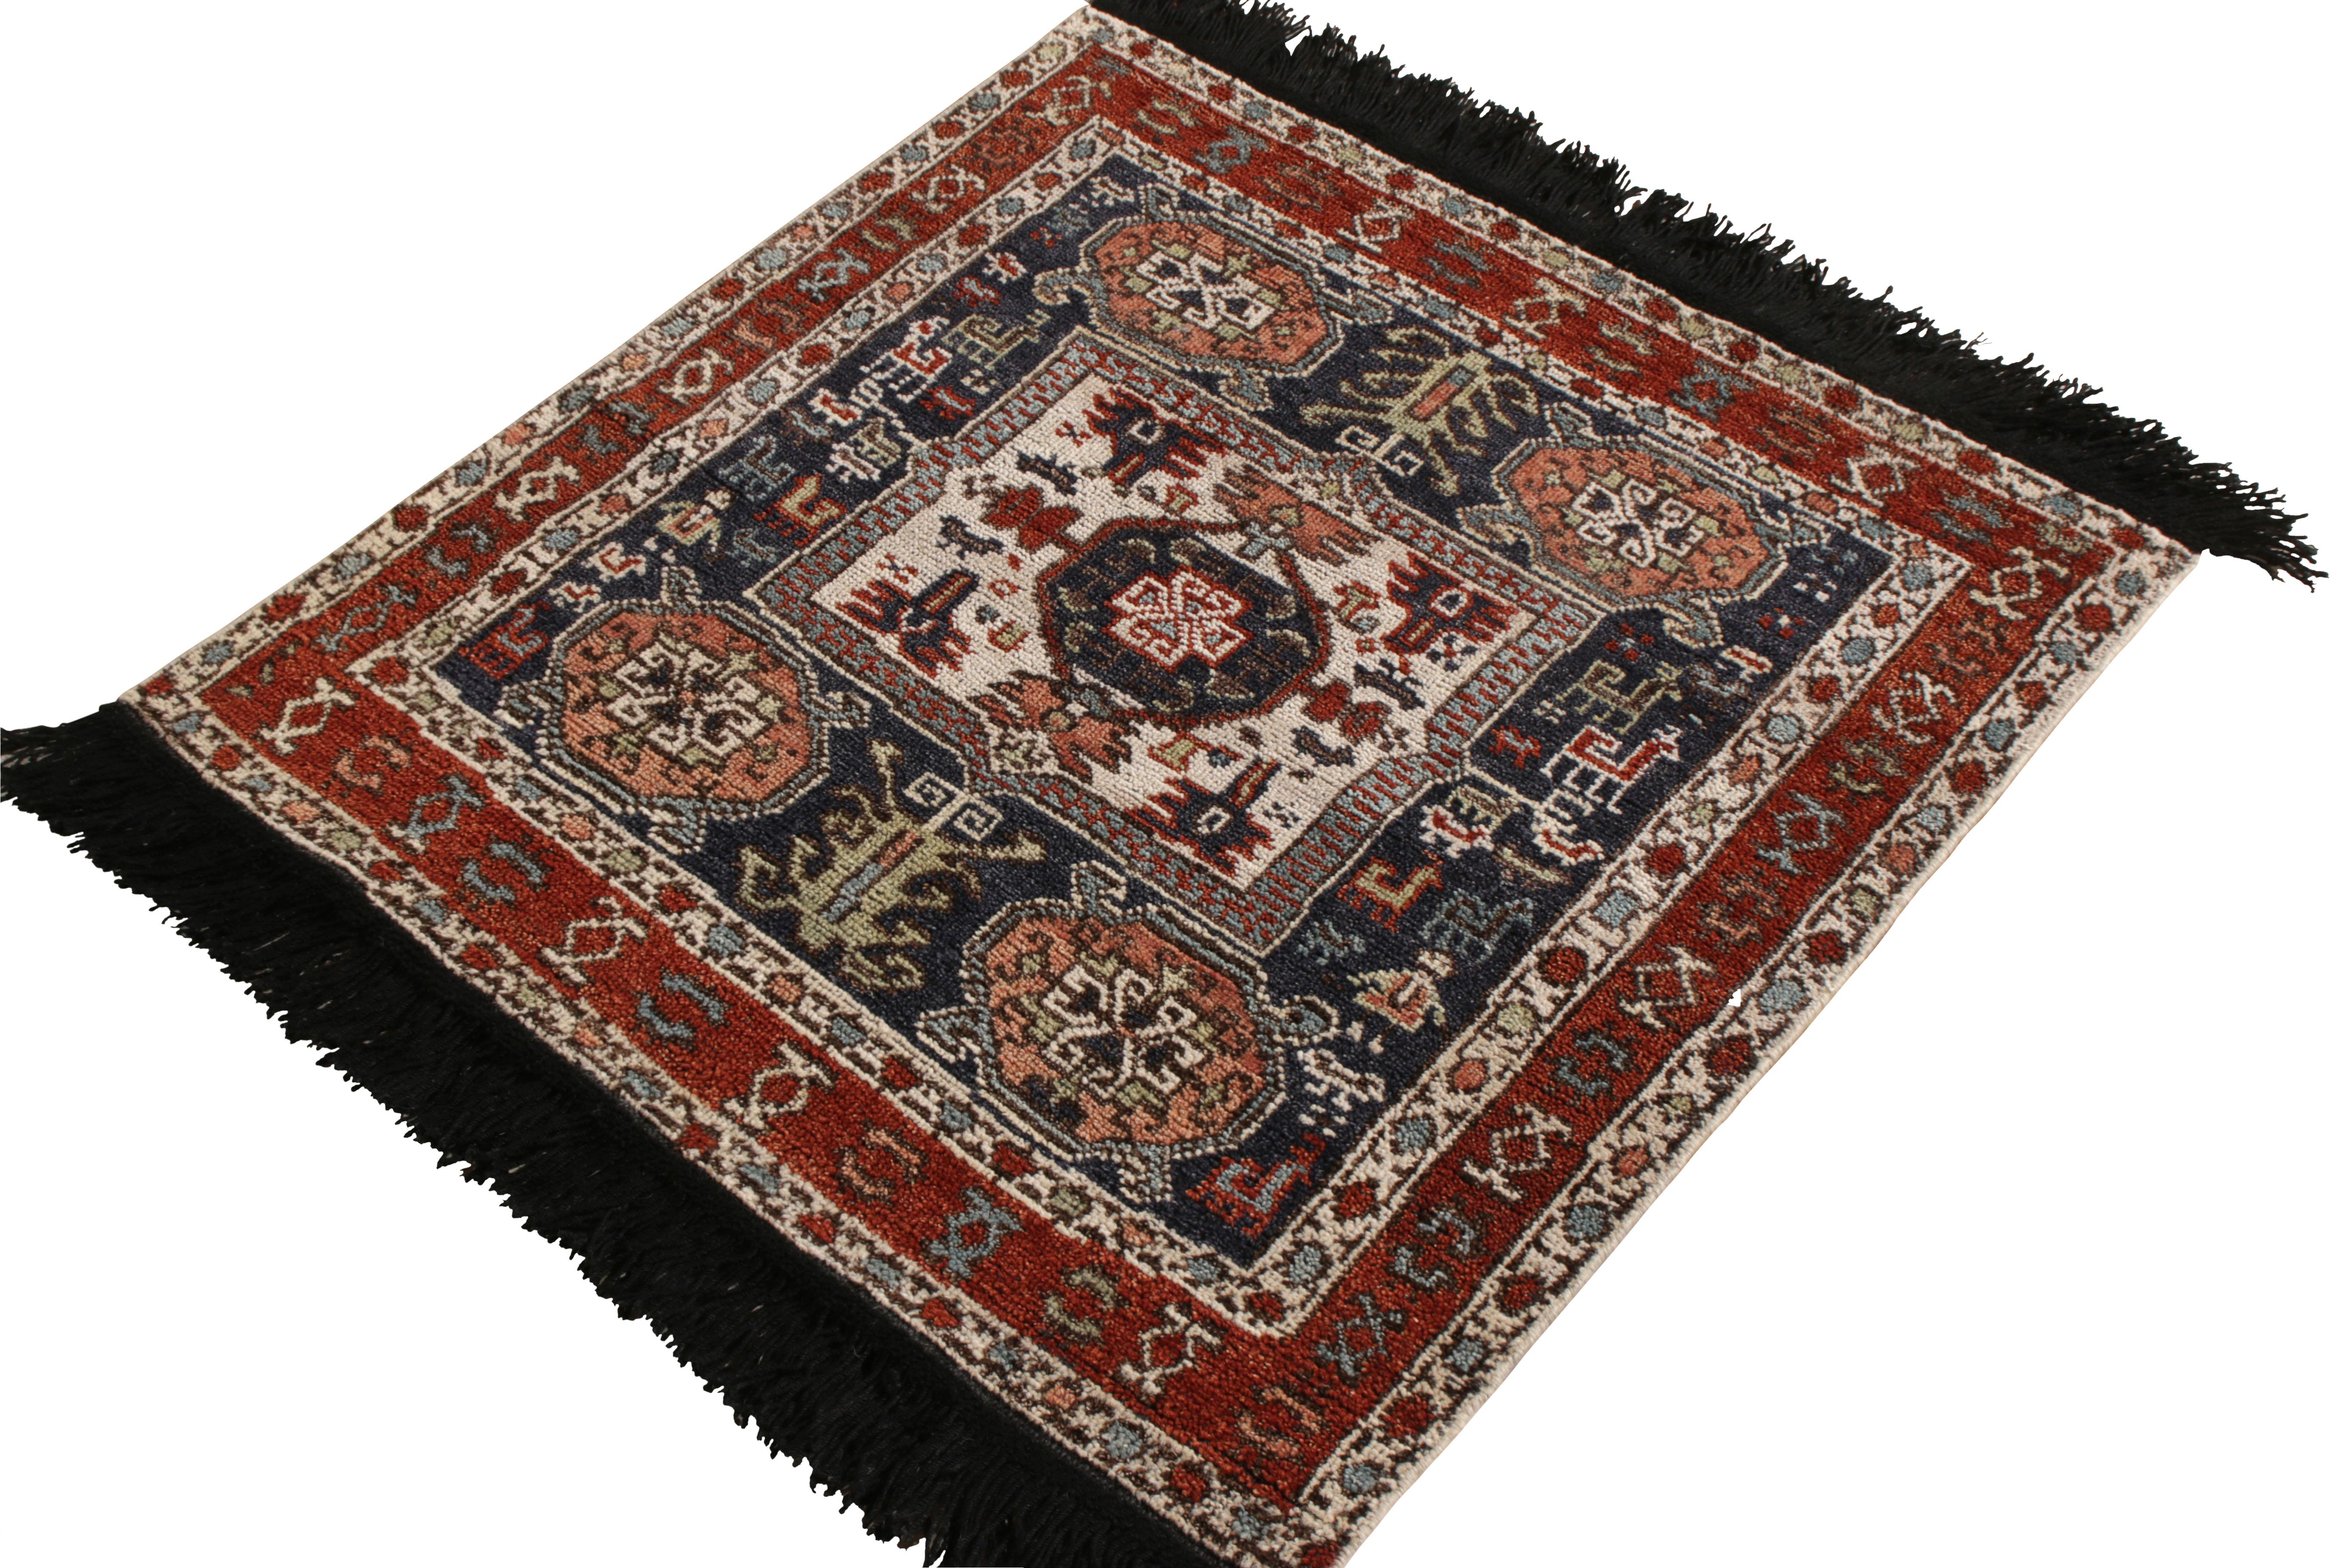 A 3 x 3 square rug nodding to celebrated tribal styles, from Rug & Kilim’s Burano Collection. Enjoying classic hues of red and blue prevailing in a wide, vibrant pallet throughout medallion and all over geometric patterns. Lending a fabulous